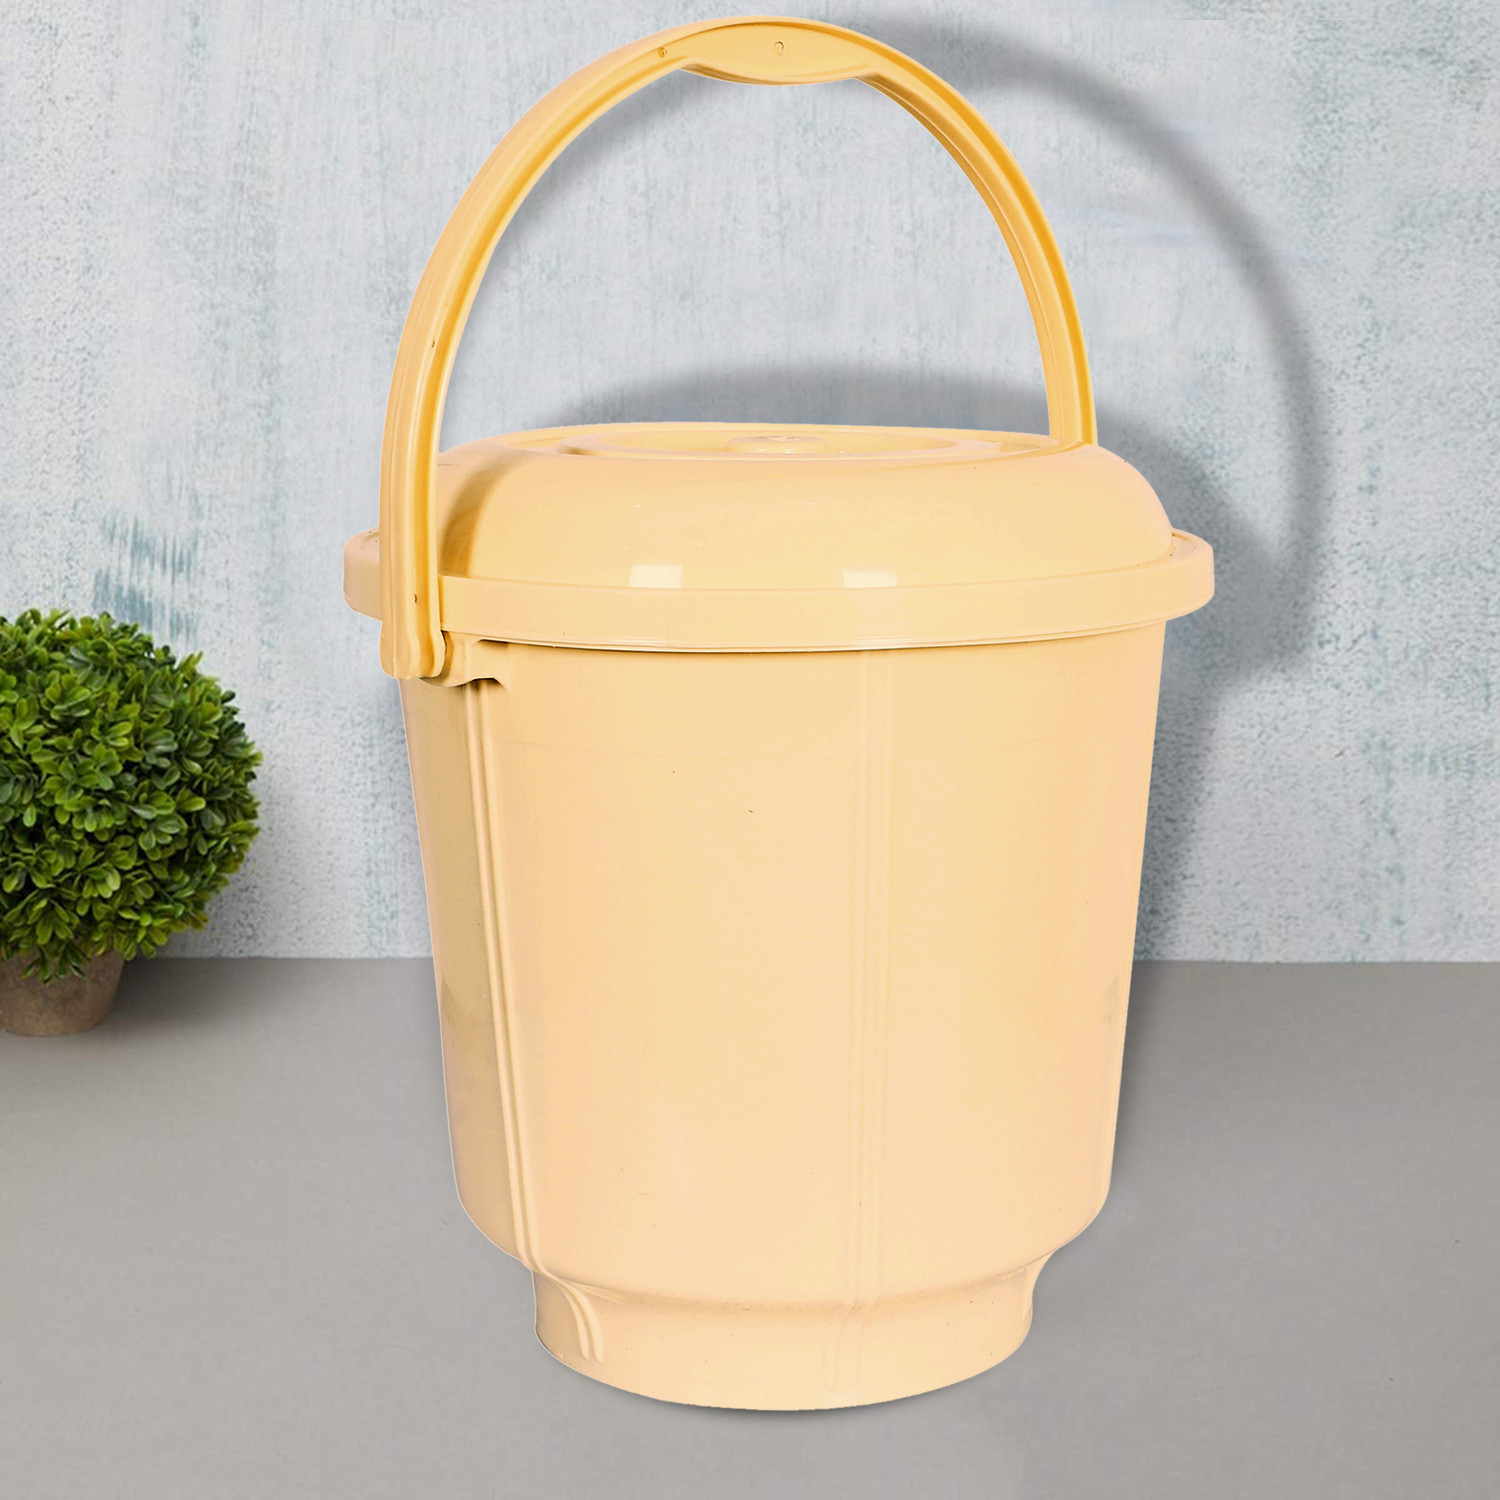 Kuber Industries Unbreakable Plastic Durable & Lightweight Strong Bathroom Bucket With Lid And Handle,13 Ltr.(Cream)